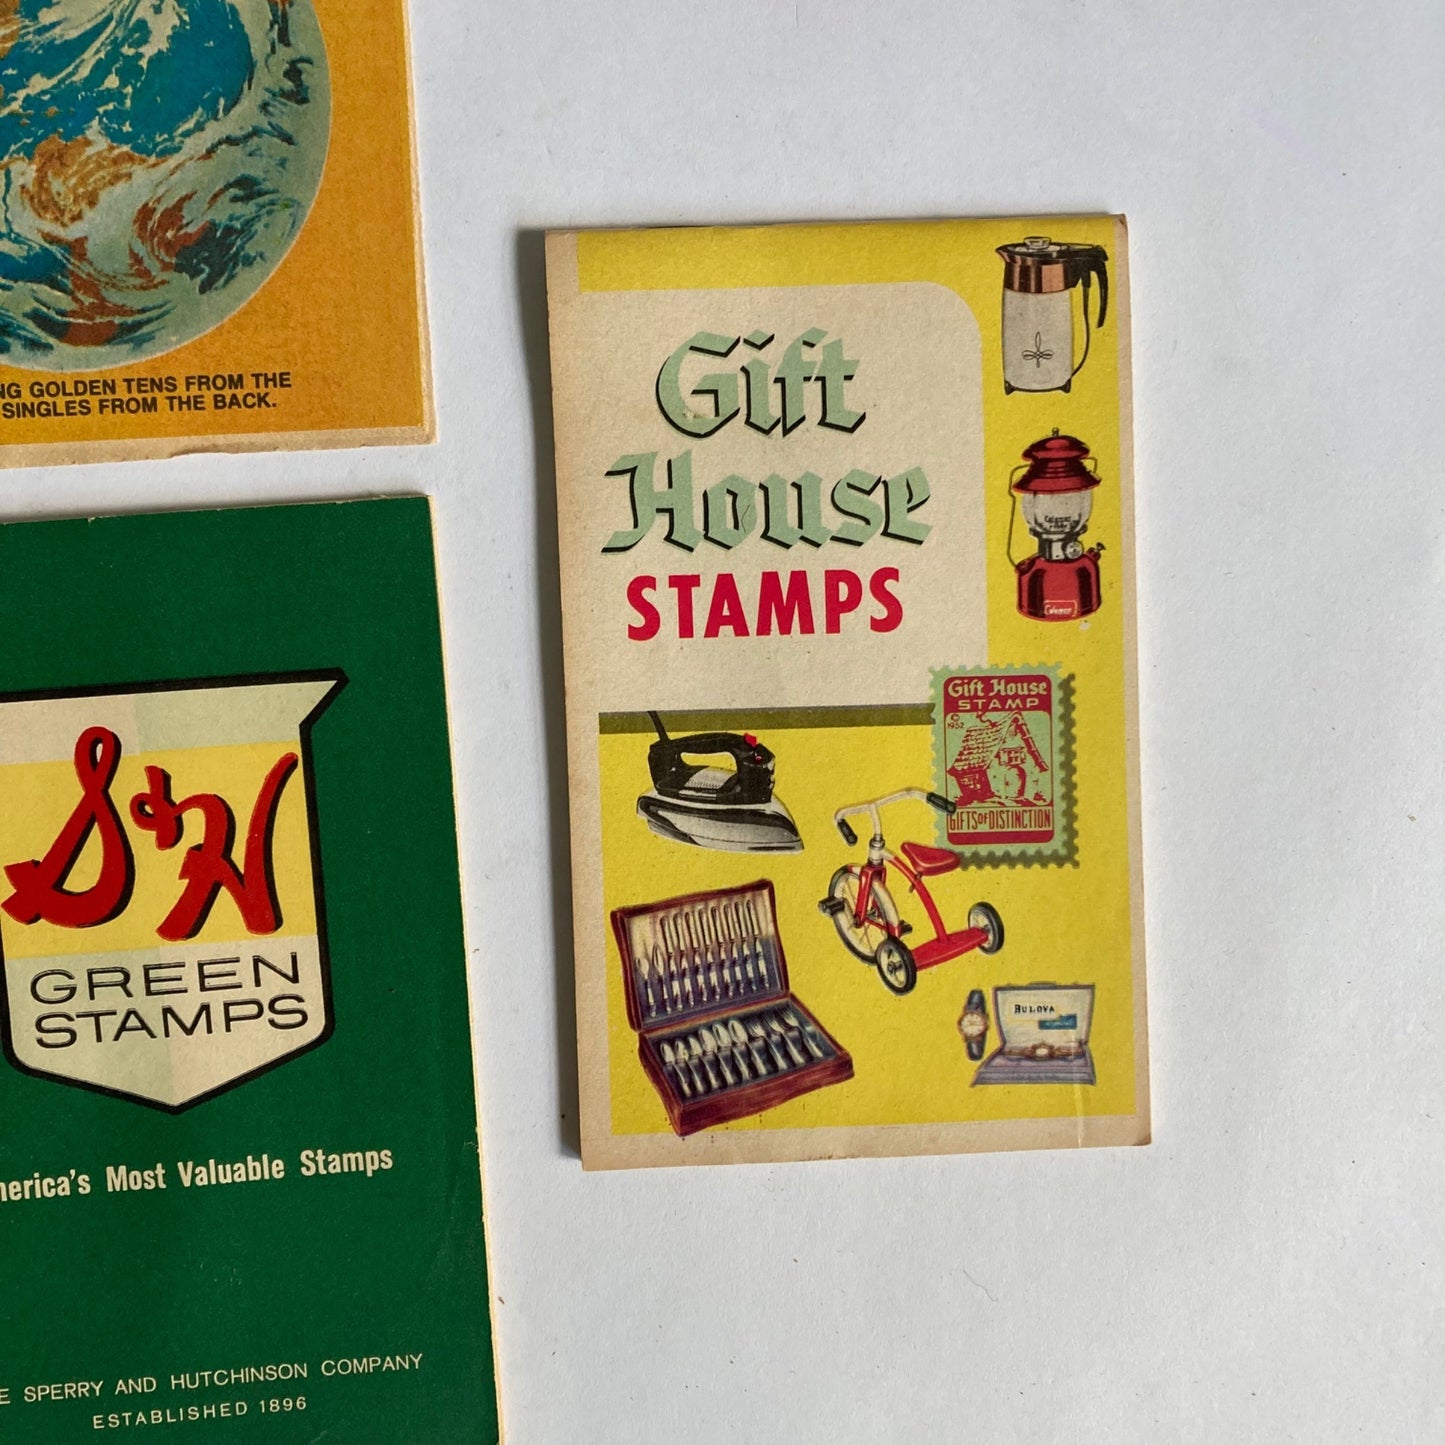 Lot Vintage Gold Bond Savers Books Holiday Gift Stamp S&N Green Stamps House